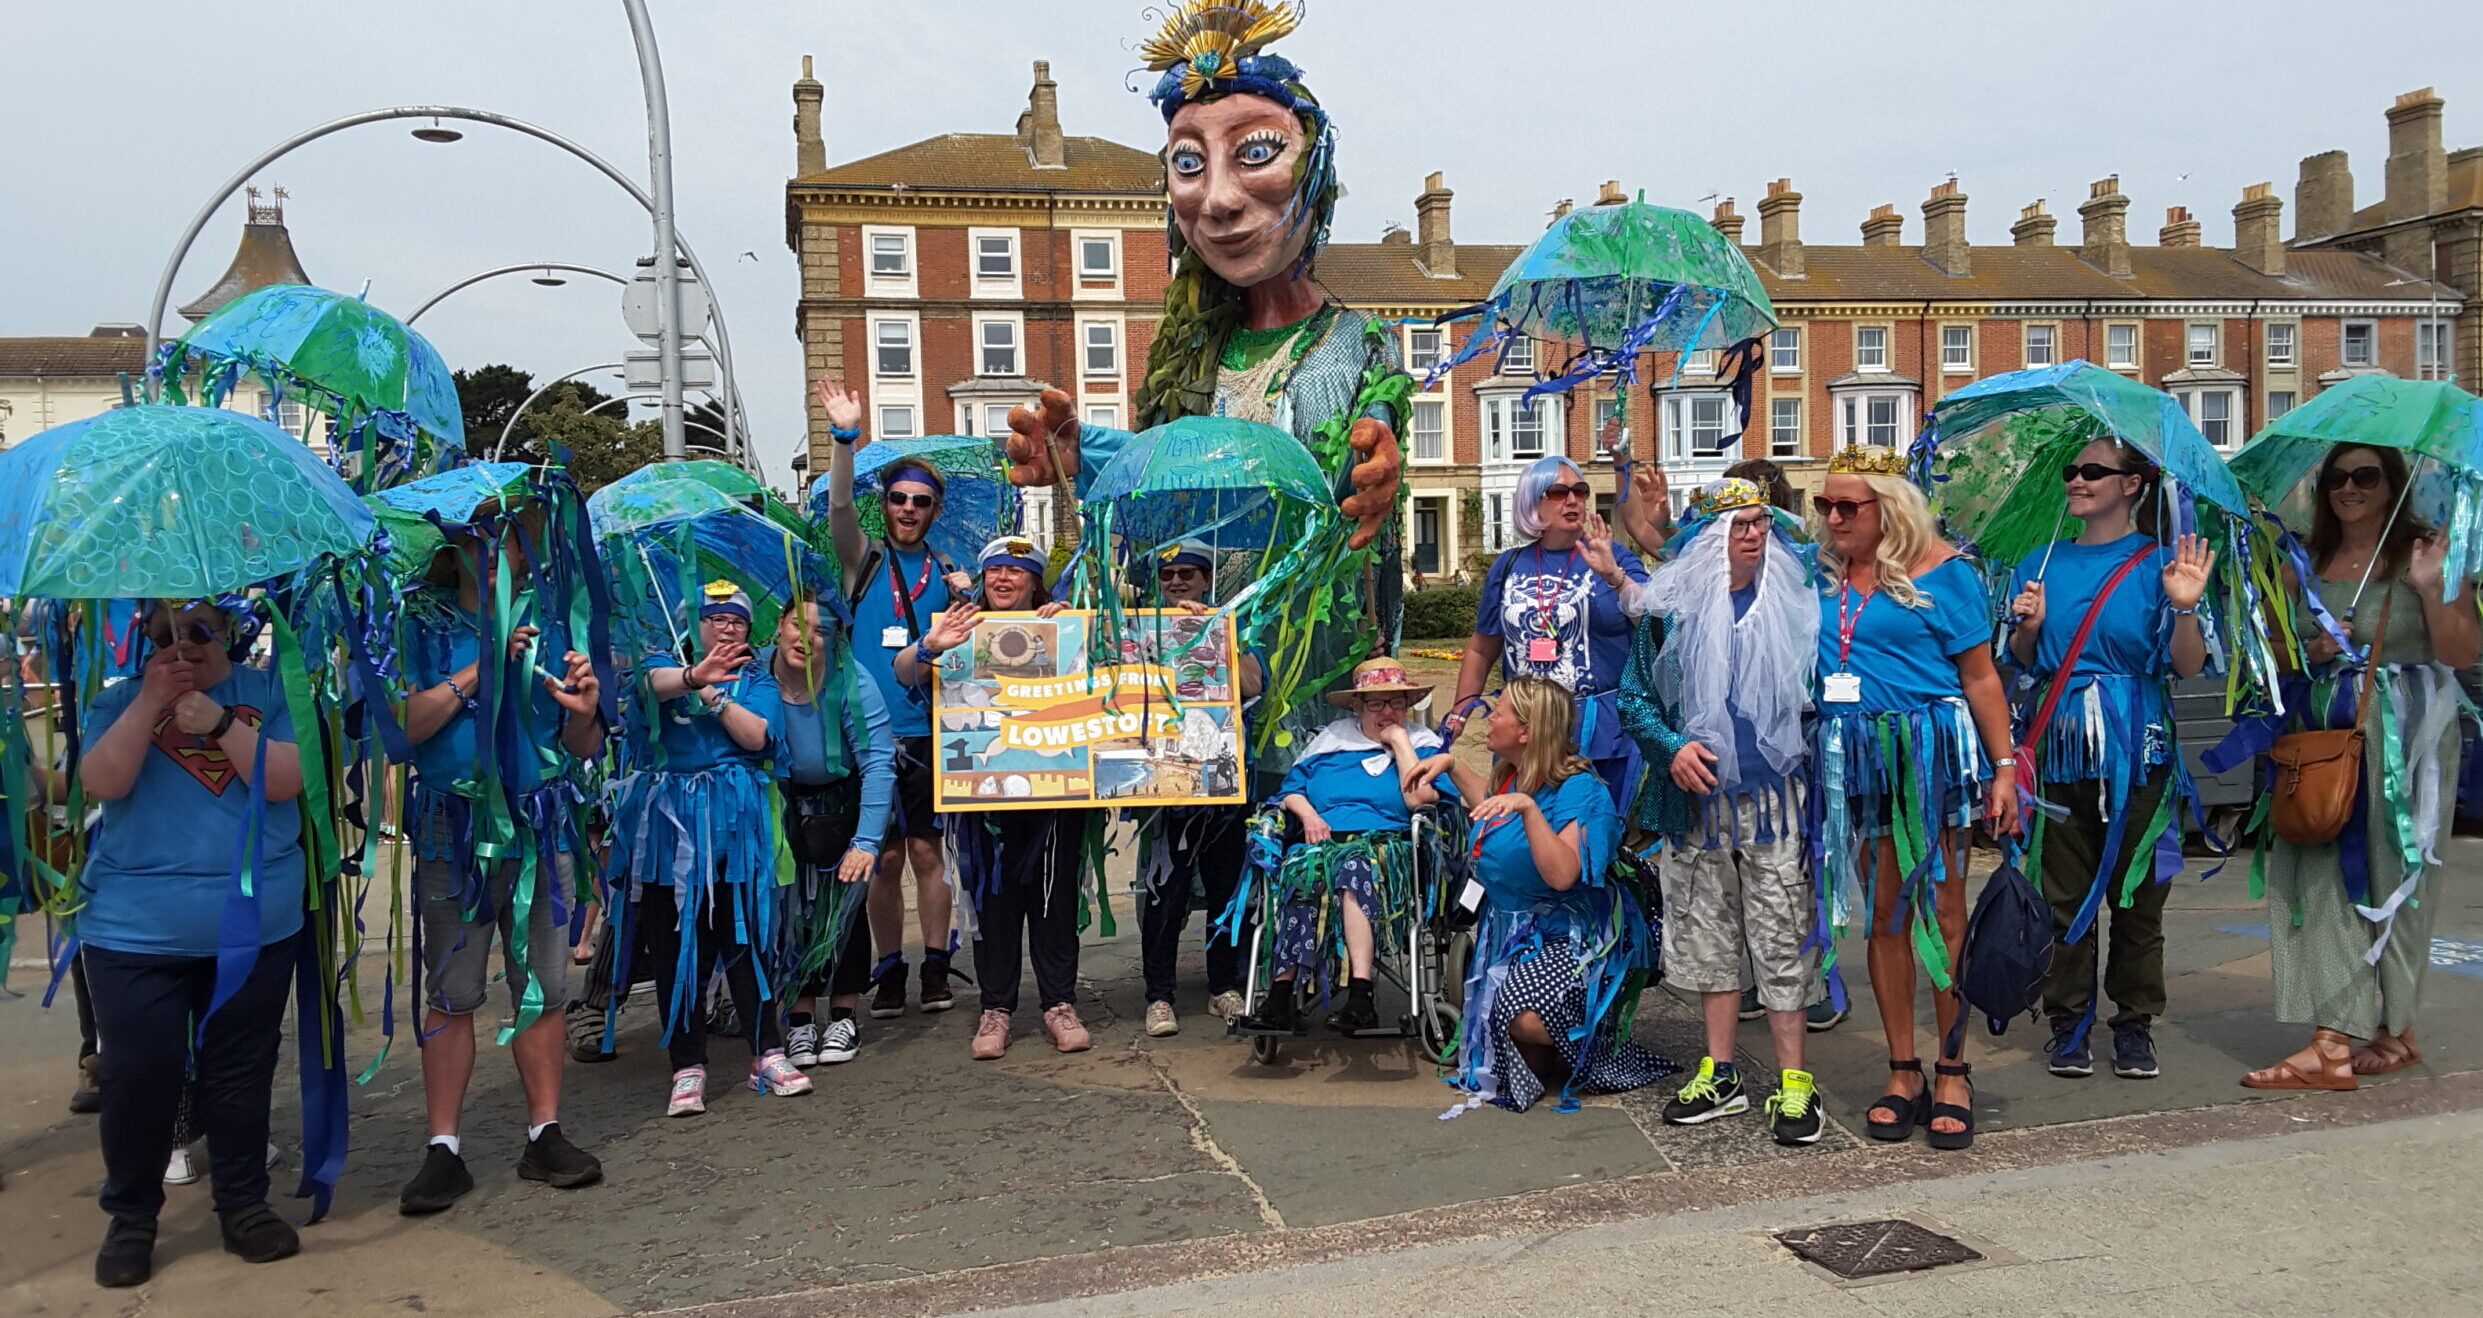 A gigantic puppet with a rising sun gold crown stands behind a line of people, dressed in bright blue T-shirts and carrying umbrellas decorated to look like sea creatures. In the centre, two participants are holding a large postcard with the message Greetings from Lowestoft.